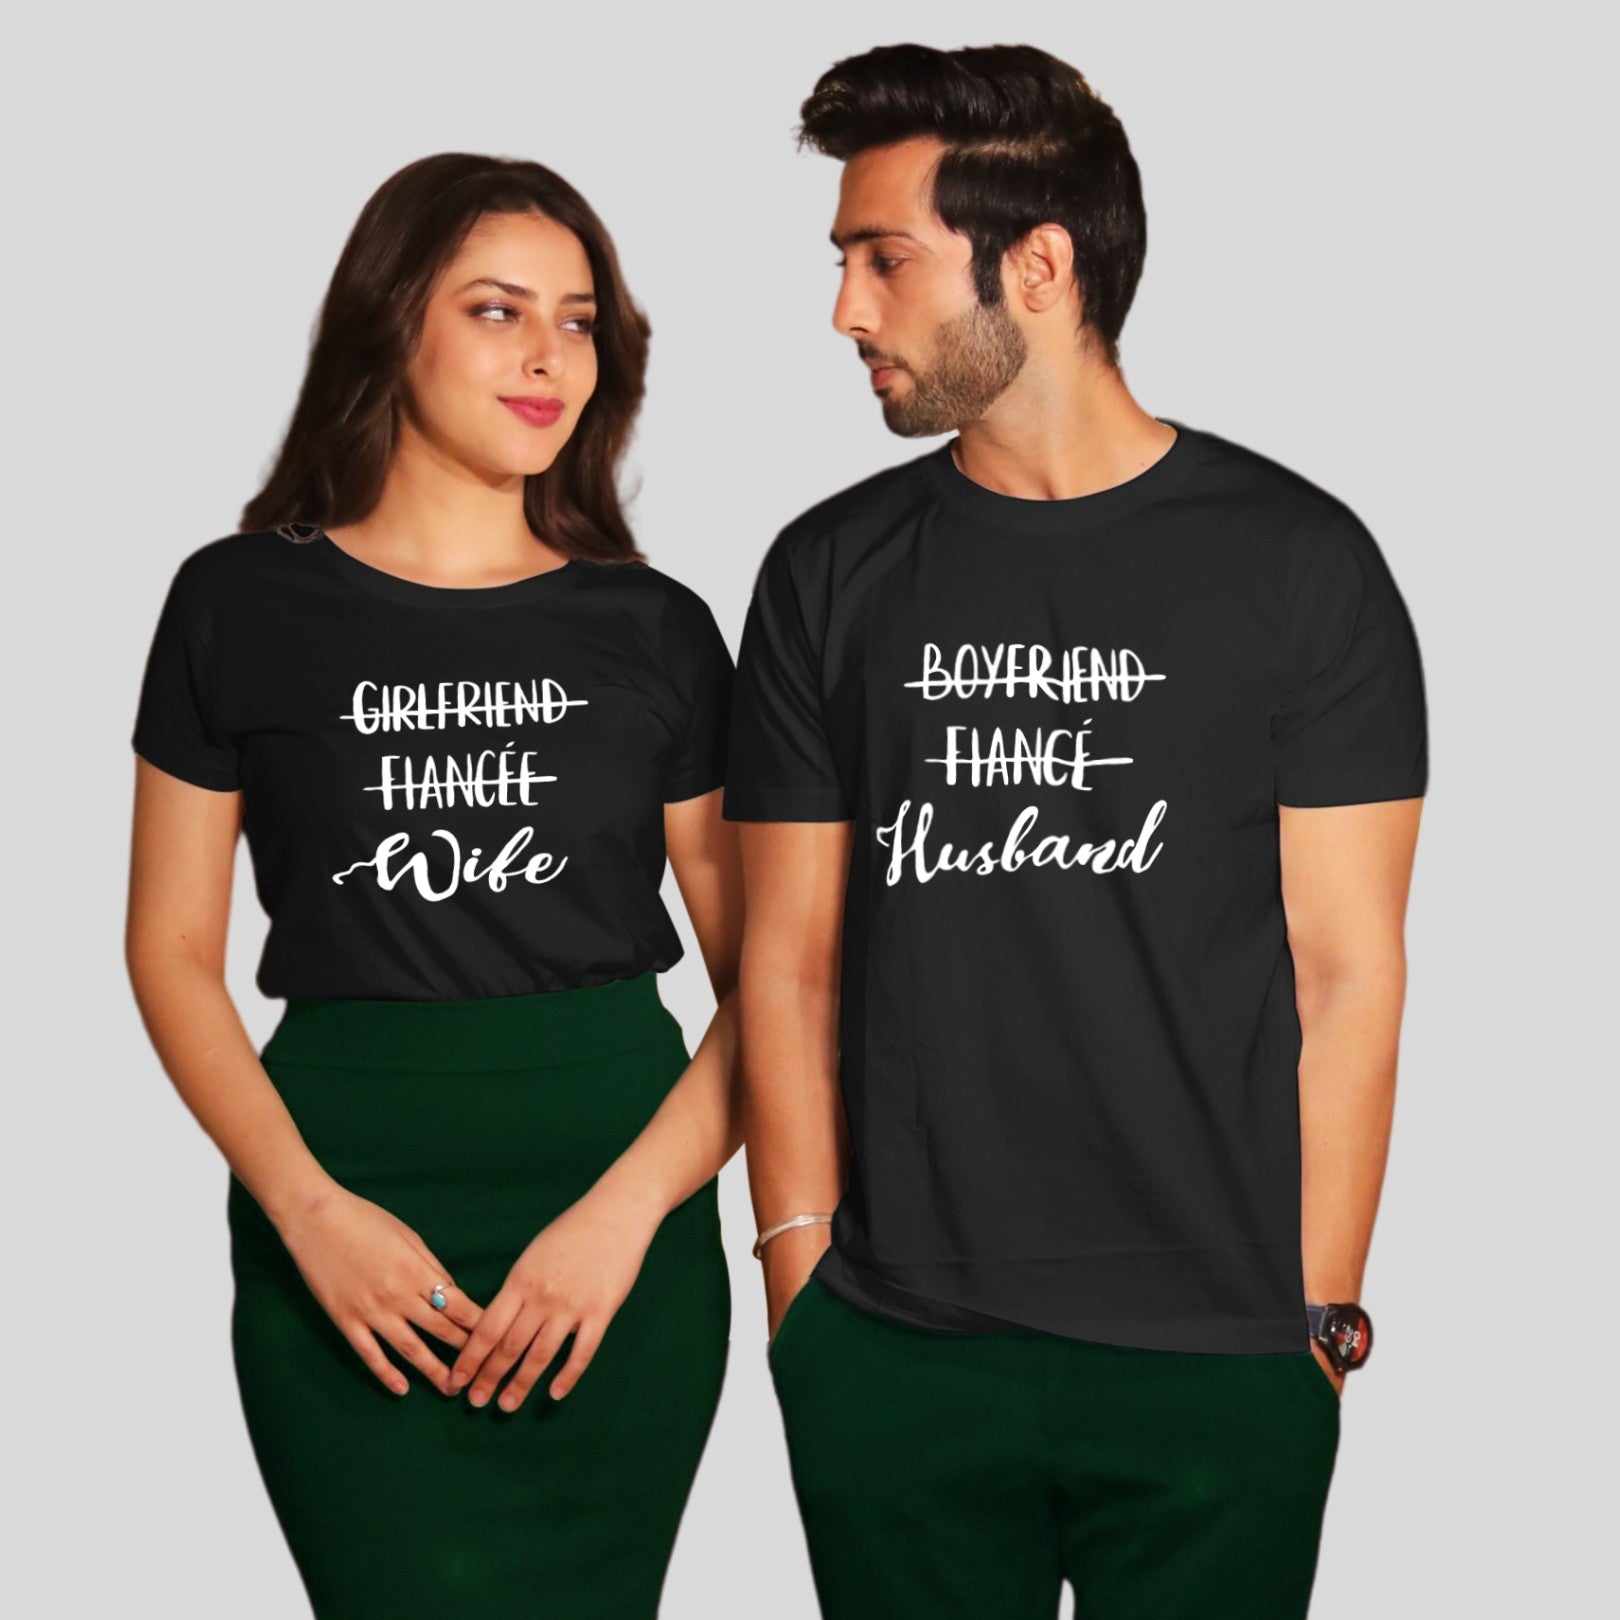 Couple T Shirt for Husband Wife In Black Colour - GF Fiance Wife BF Fiance Husband Variant